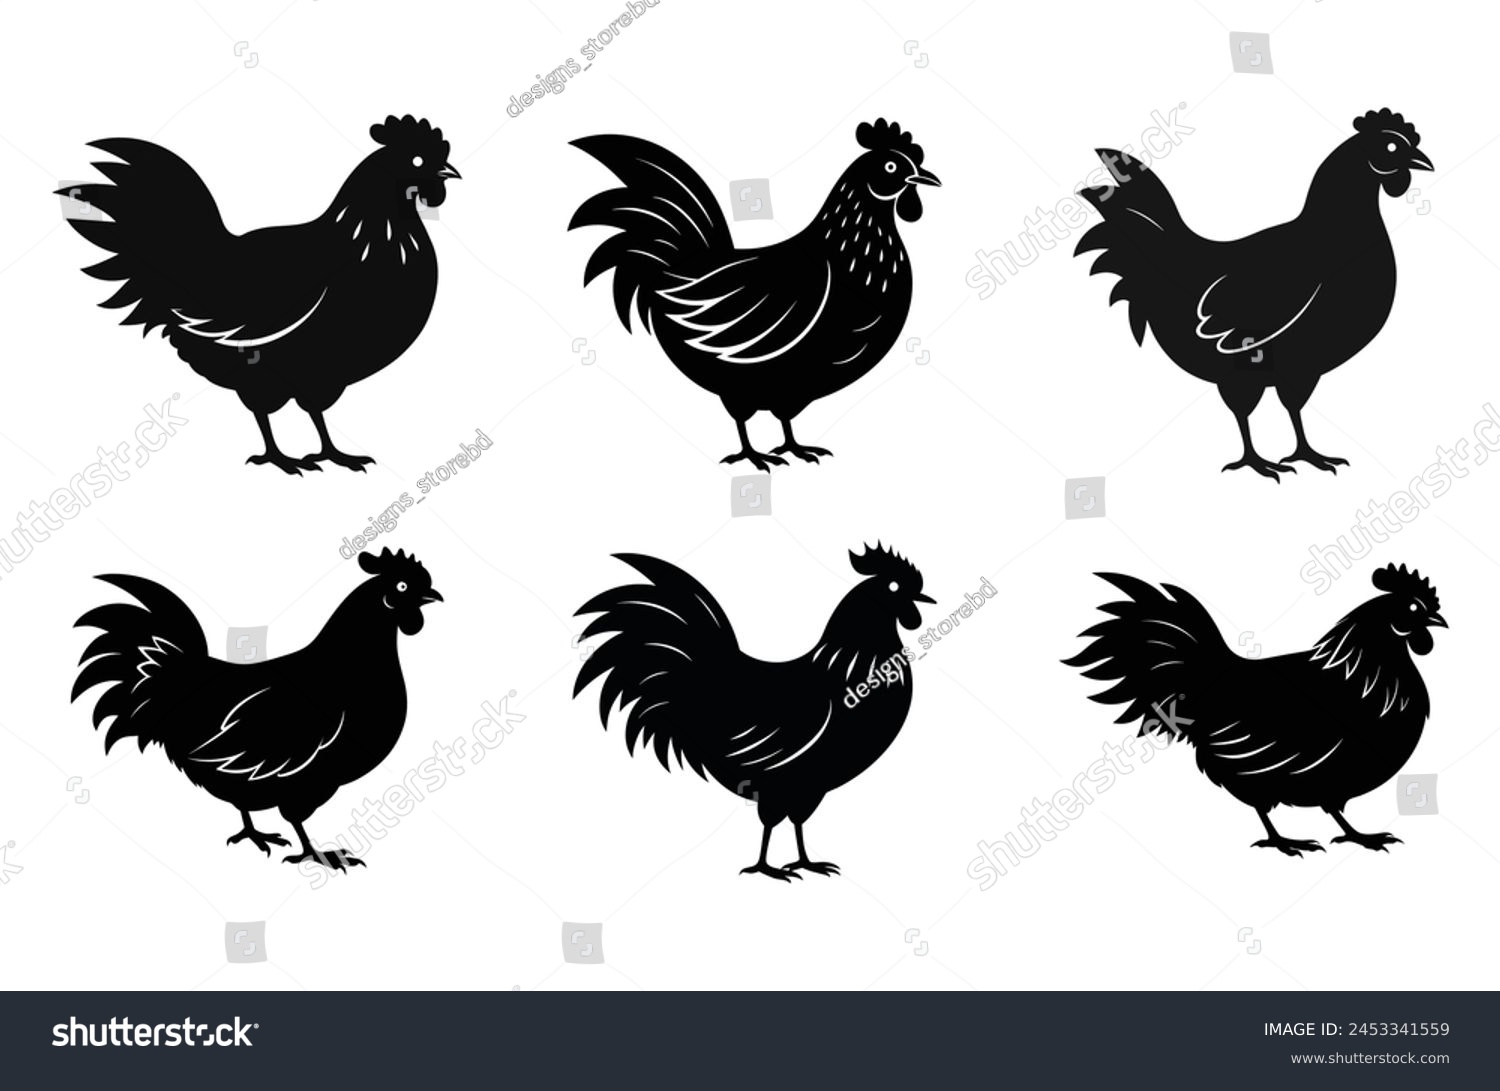 SVG of Chicken silhouette vector illustration With on white background svg